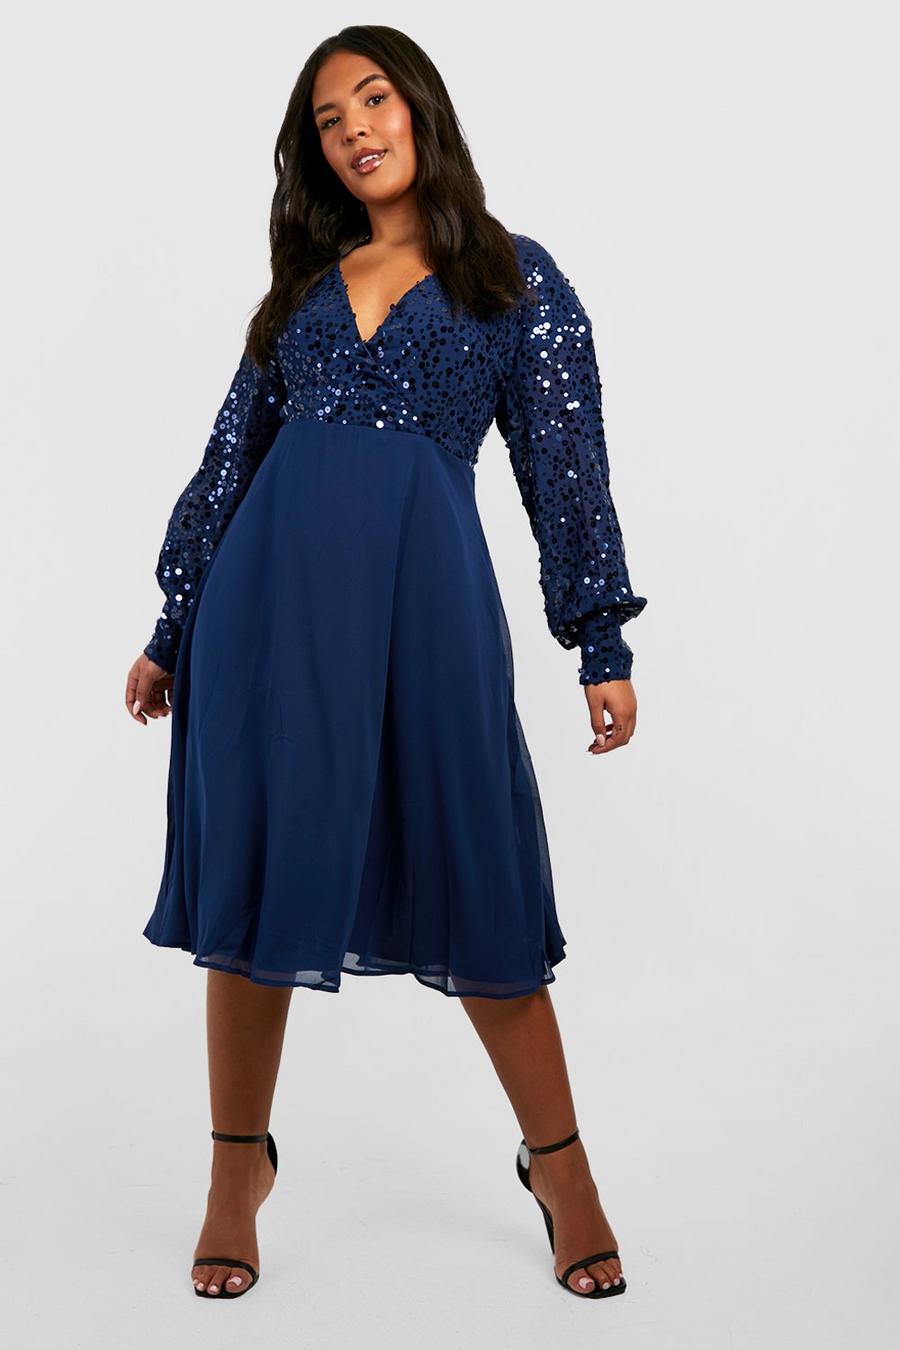 Plus Size Holiday Outfits 2024, Plus Size Christmas Party Dresses